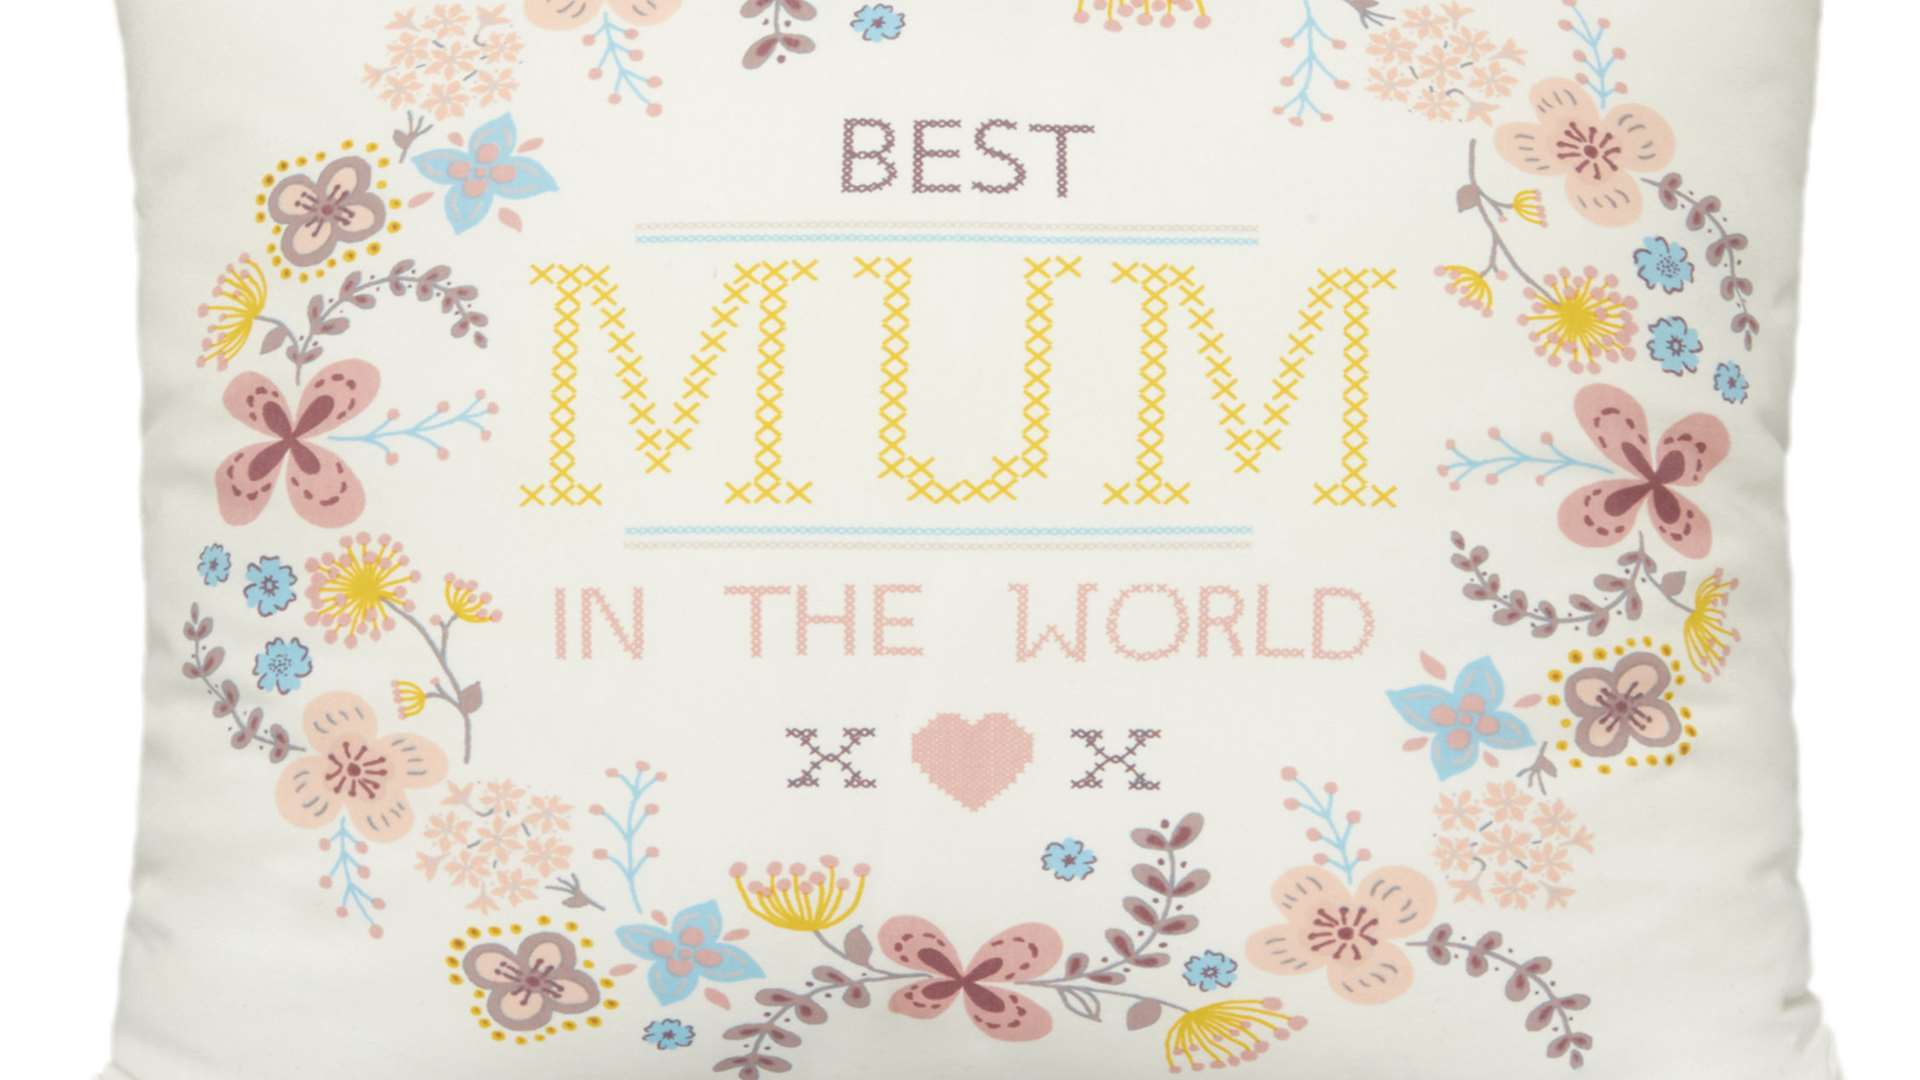 Have you got the Best Mum in the World?